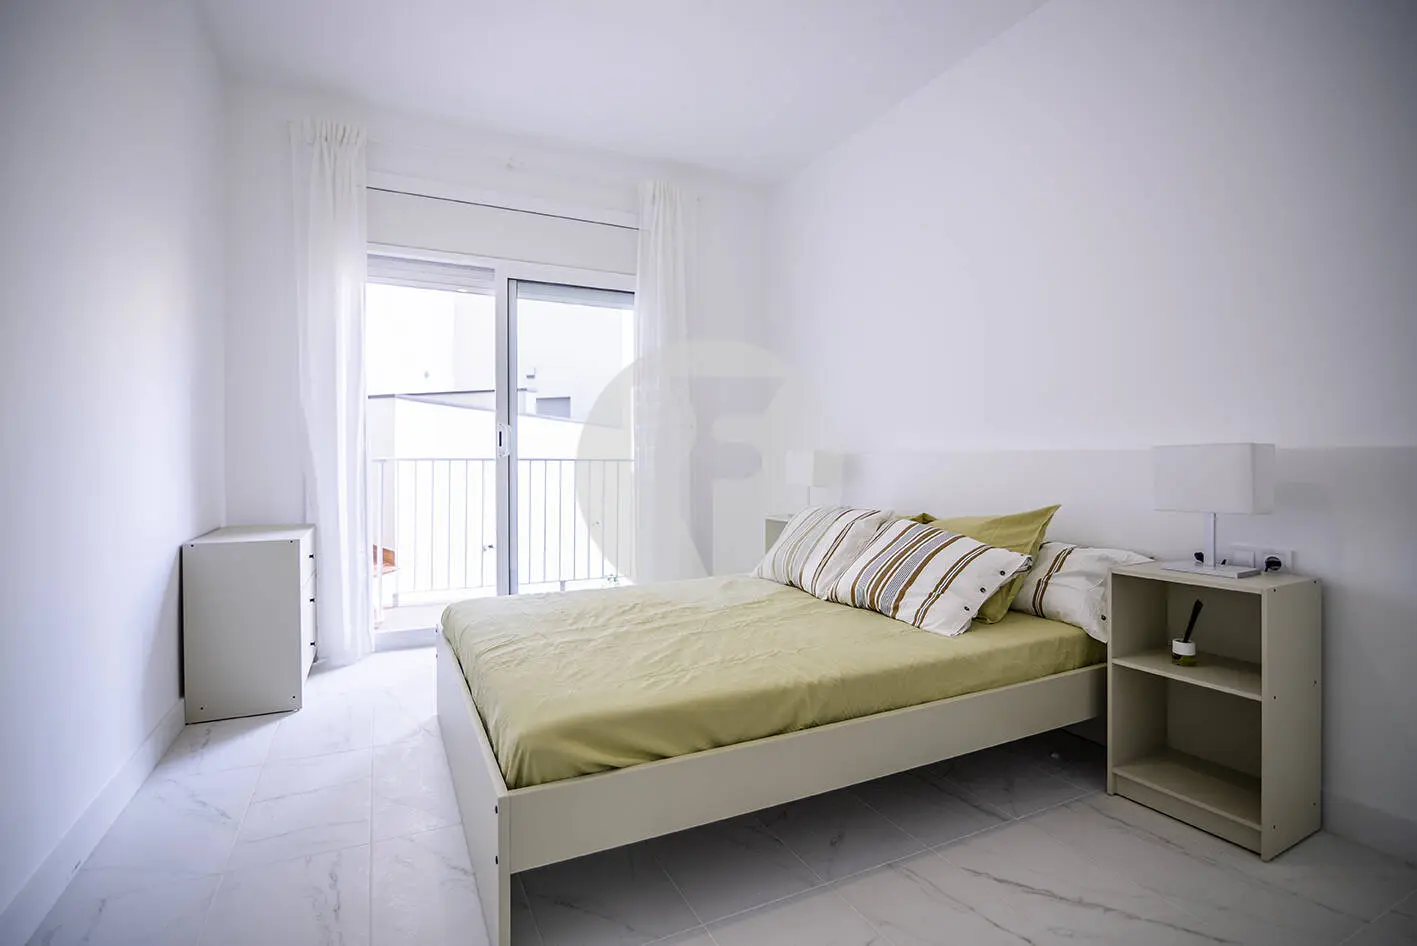 Brand new completely renovated apartment on Aragó street in the heart of El Clot in Barcelona. 30